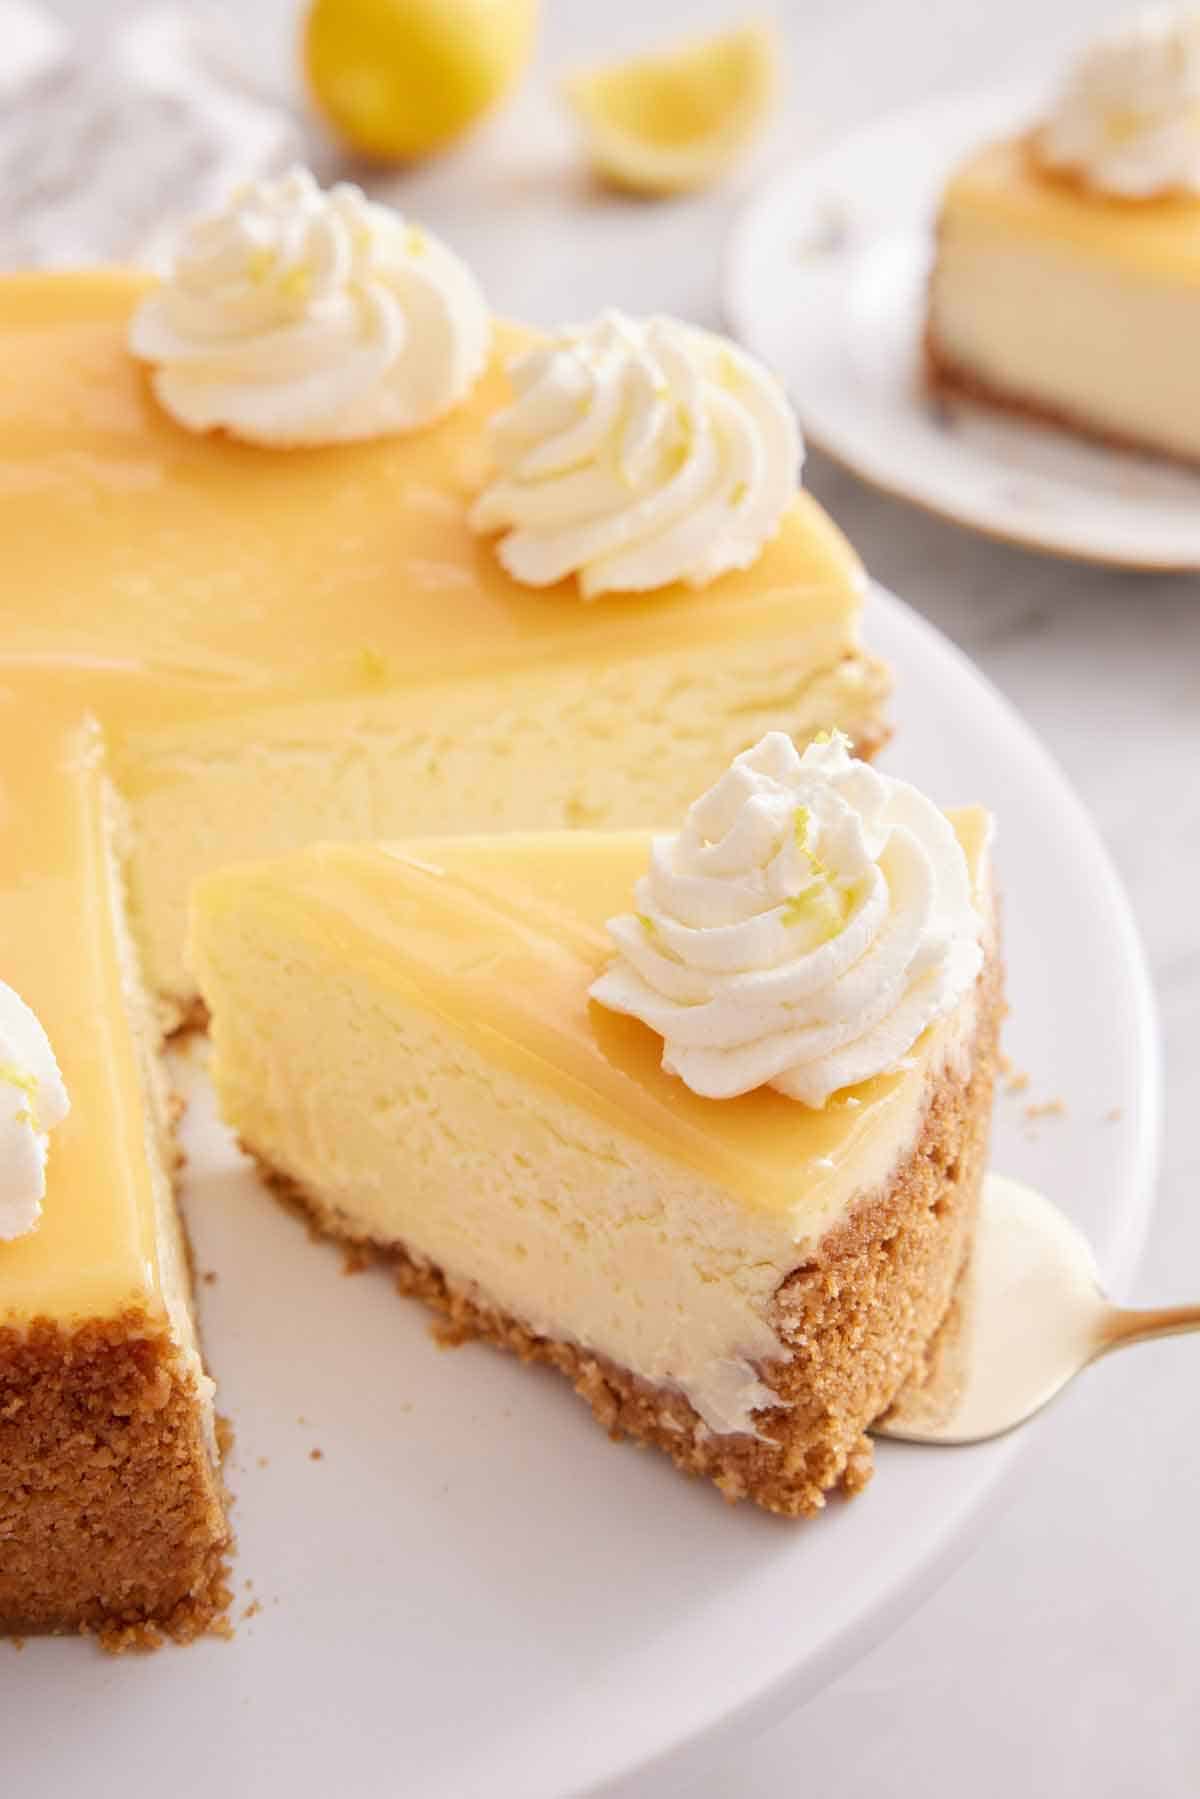 A slice of lemon cheesecake with a spatula tucked underneath pulled from the rest of the cake.